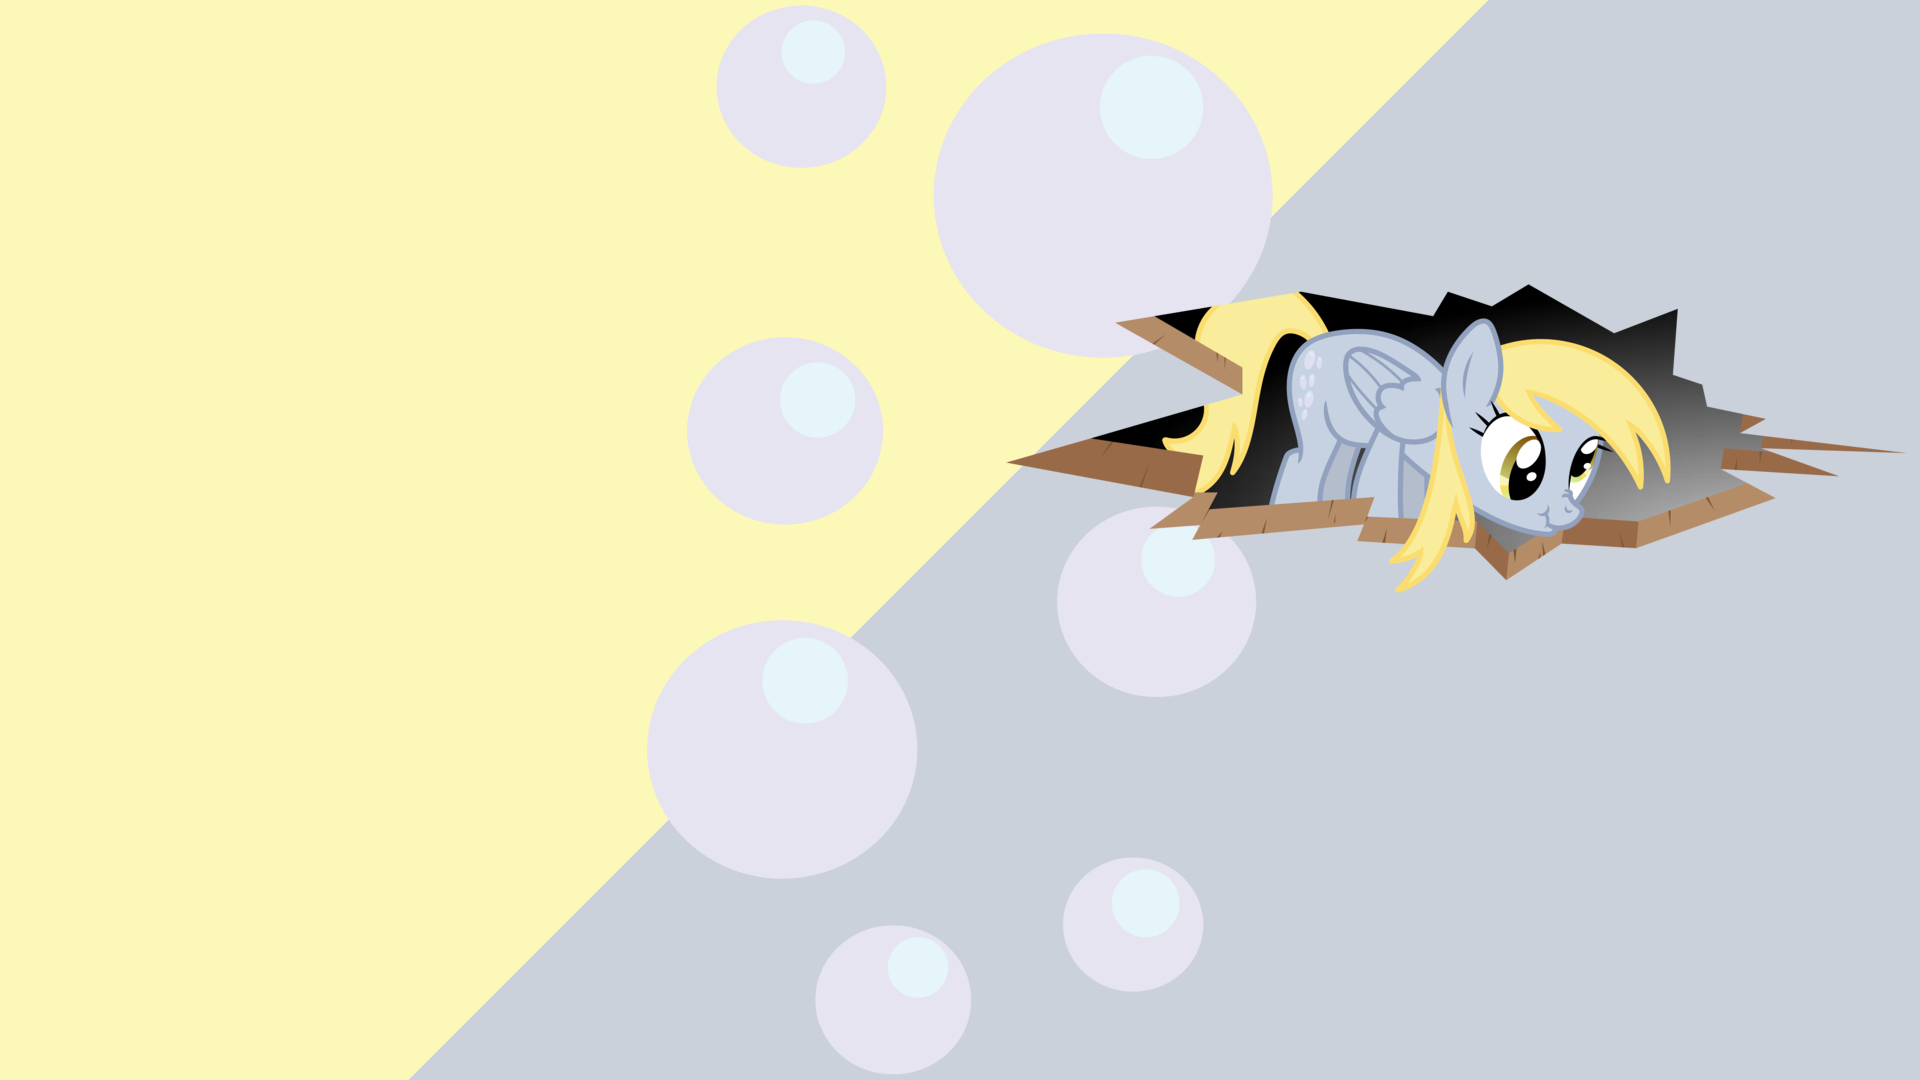 Minimalist Wallpaper 1: Derpy Hooves by ooklah, Softfang and Stormius